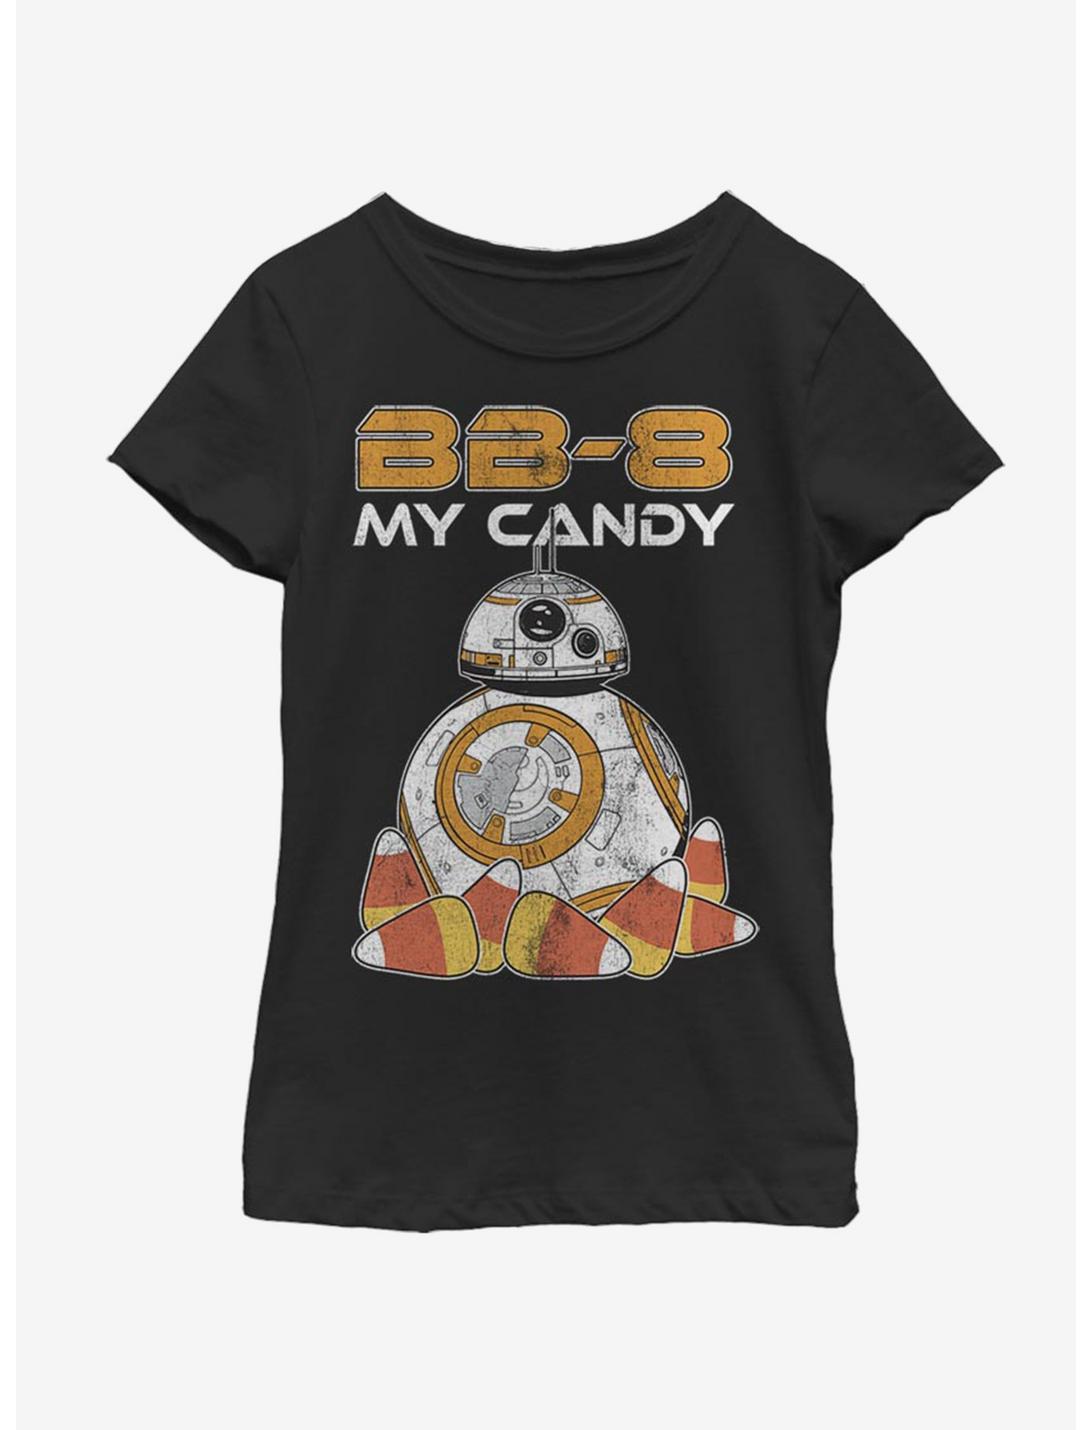 Star Wars The Force Awakens BB8 Candy Youth Girls T-Shirt, BLACK, hi-res